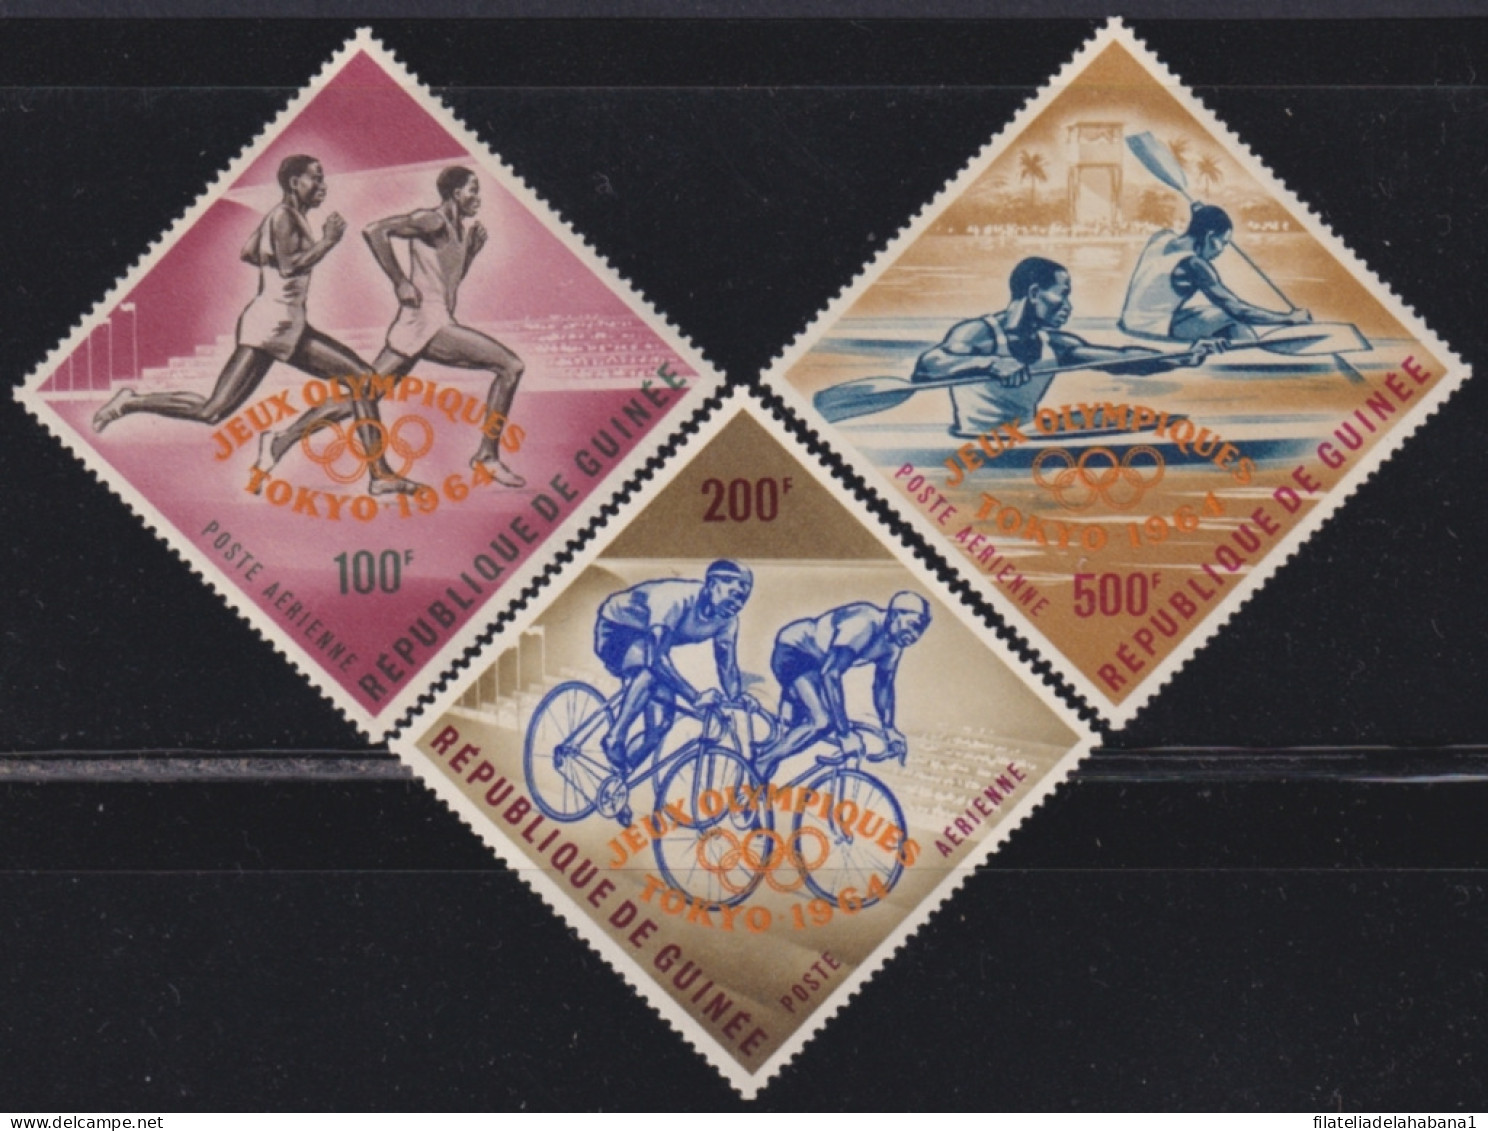 F-EX49269 GUINEE GUINEA MNH 1968 TOKIO OLYMPIC GAMES OVERPRINT CICLYNG ATHLETISM.  - Estate 1968: Messico